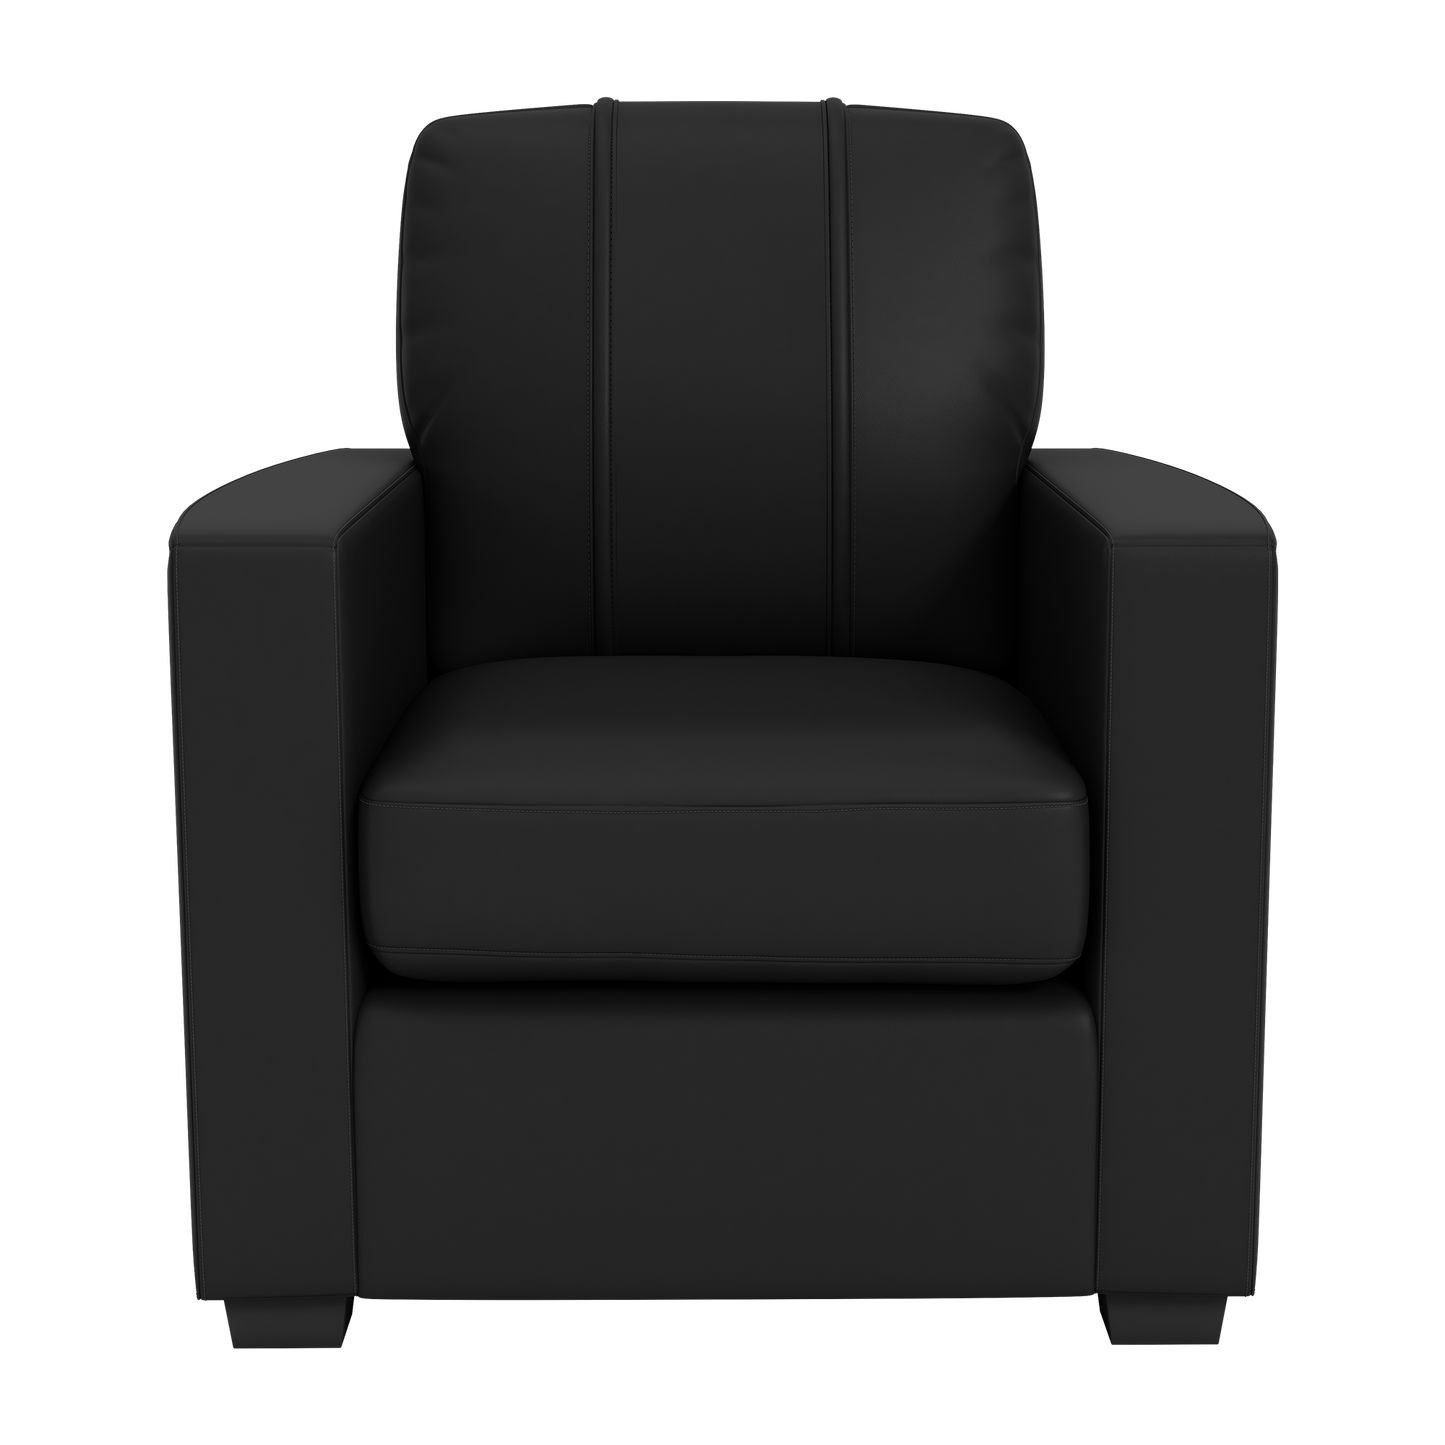 Silver Club Chair with  Cleveland Browns Helmet Logo